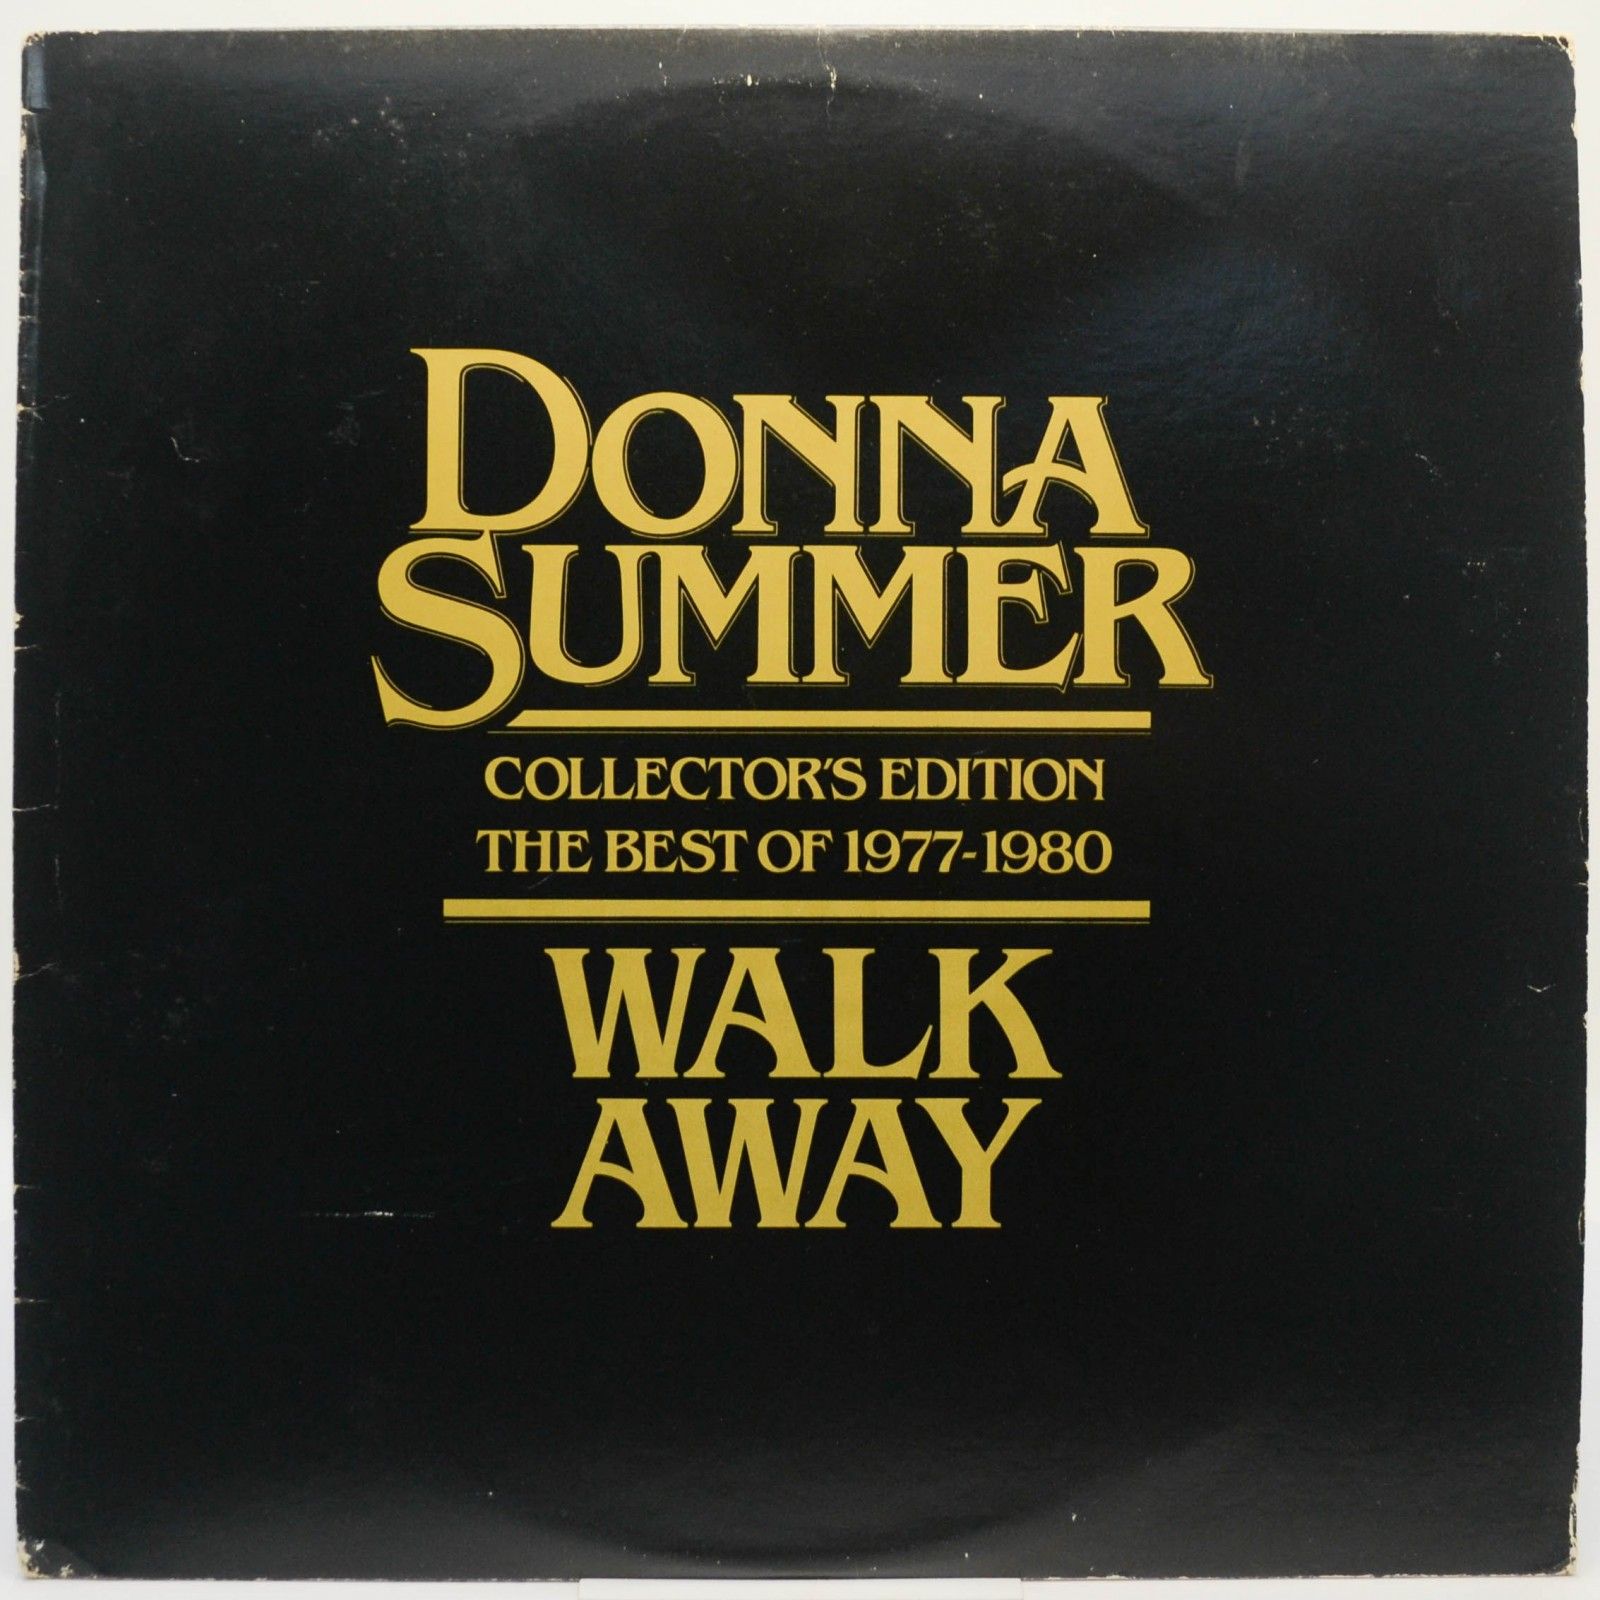 Donna Summer — Walk Away Collector's Edition (The Best Of 1977-1980) (USA), 1980